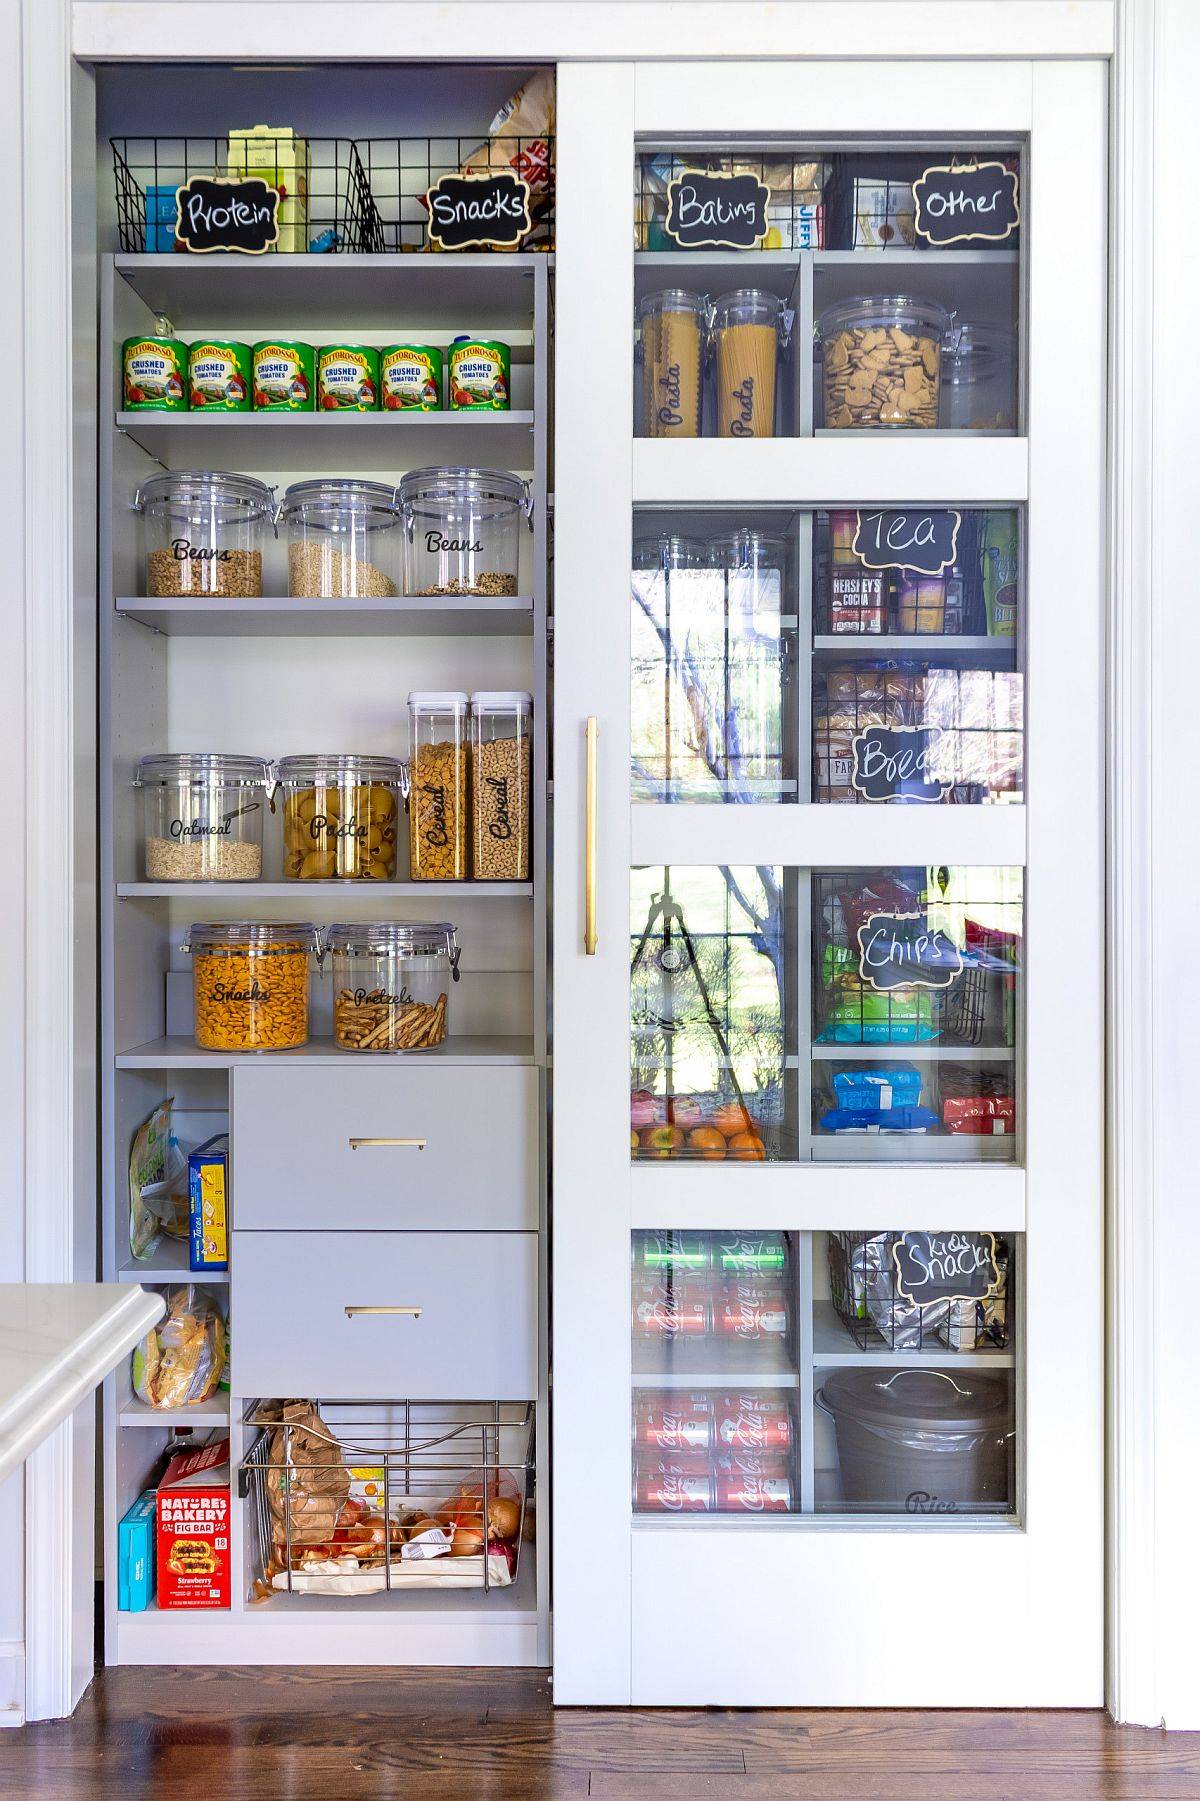 Add a pantry to the kitchen that meets your specific needs!